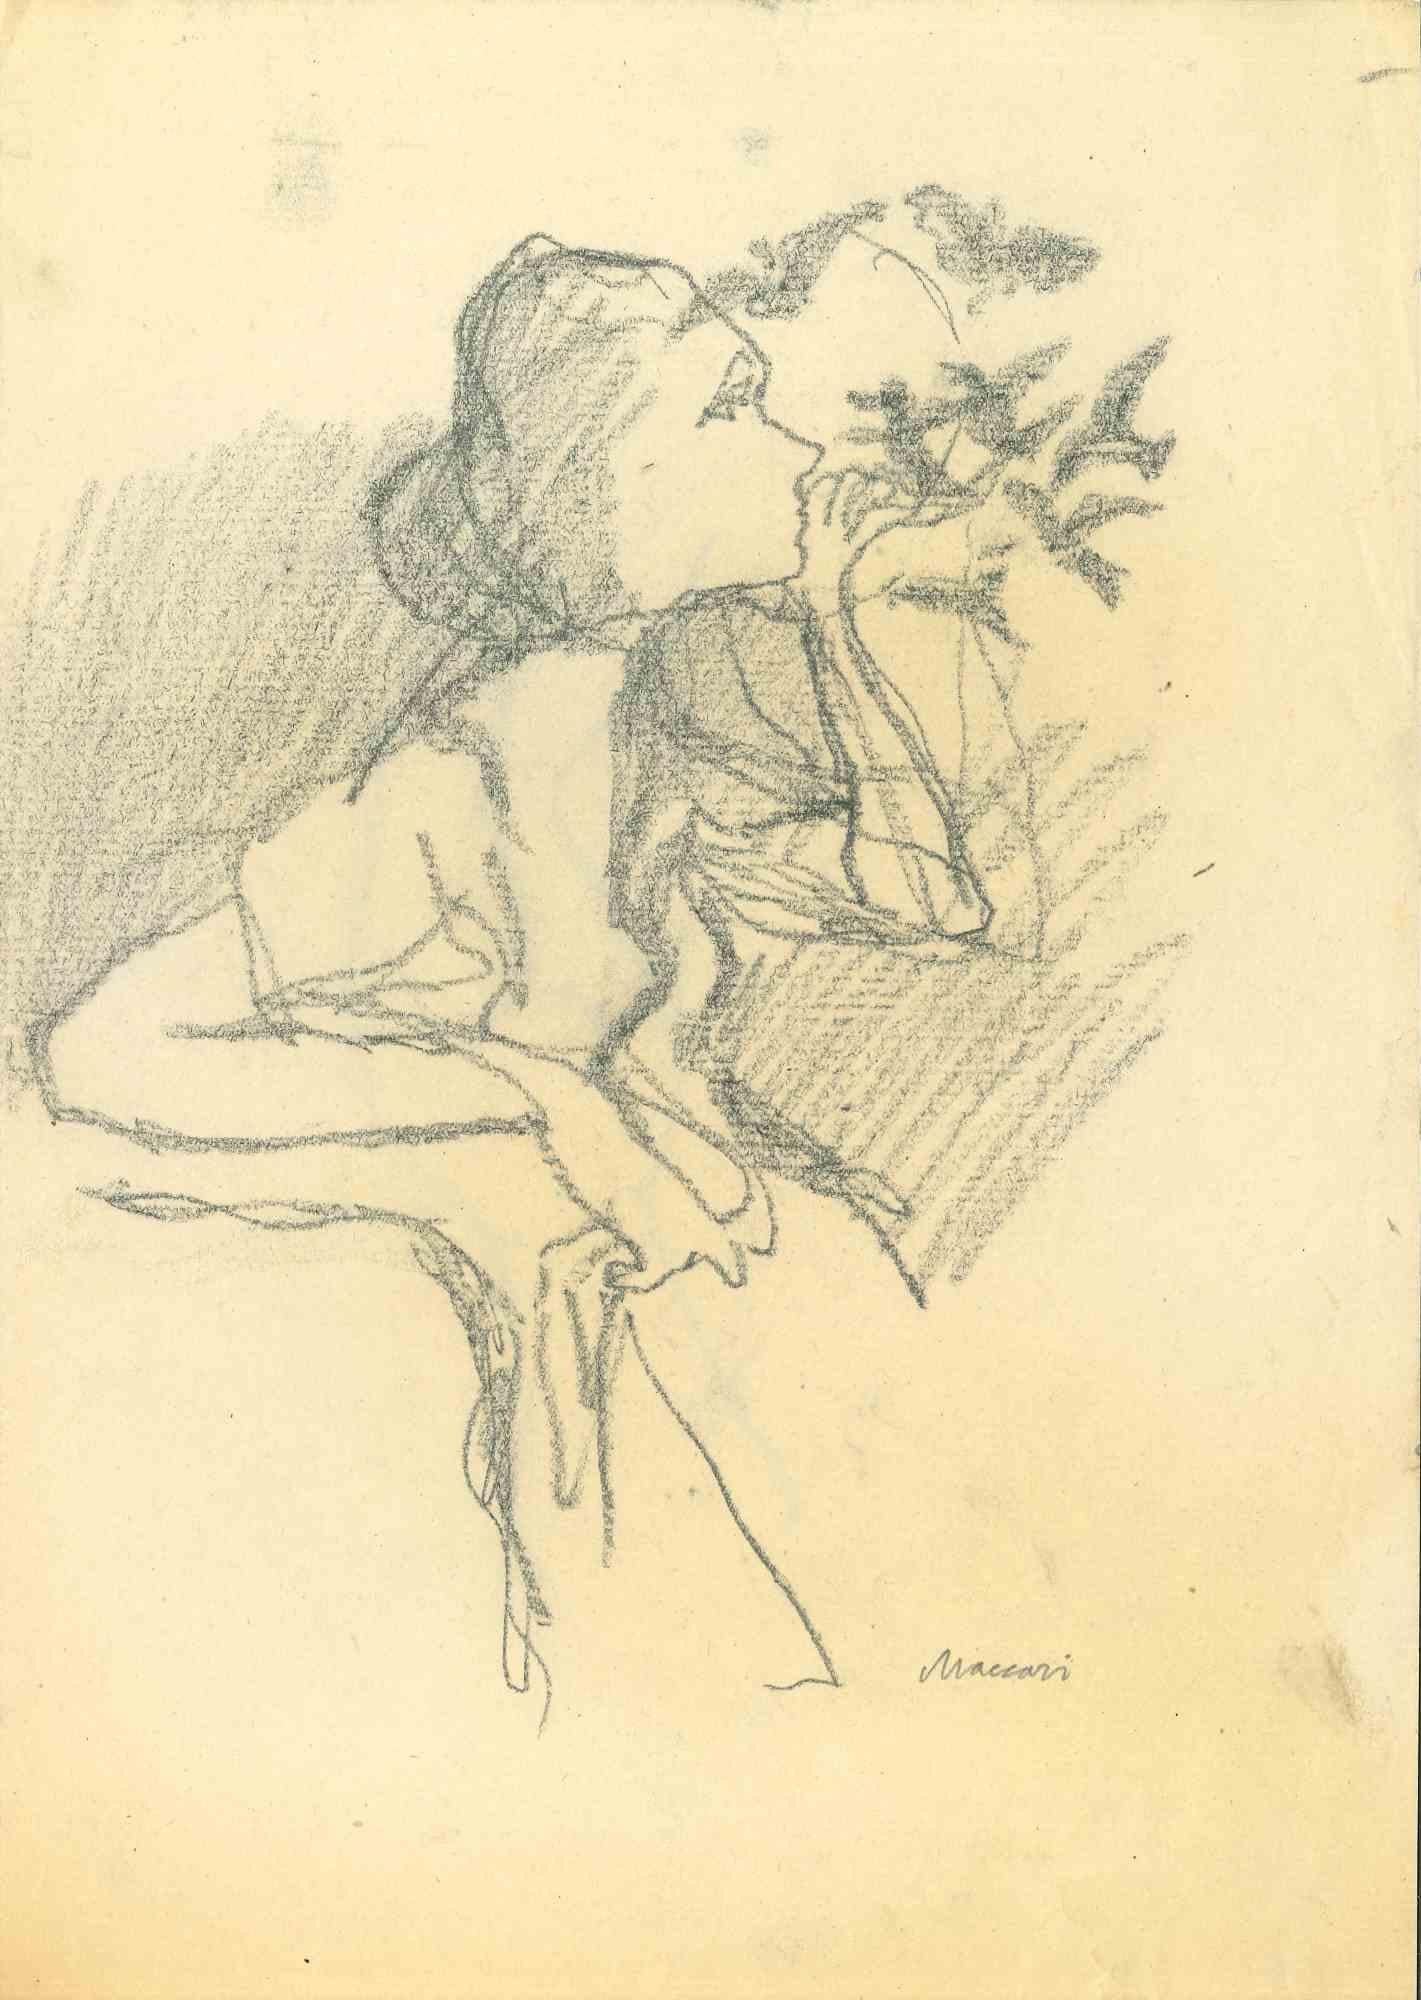 Figure is a charcoal drawing realized by Mino Maccari  (1924-1989) in the Mid-20th Century.

Hand-signed.

Good conditions with slight foxing.

Mino Maccari (Siena, 1924-Rome, June 16, 1989) was an Italian writer, painter, engraver and journalist,